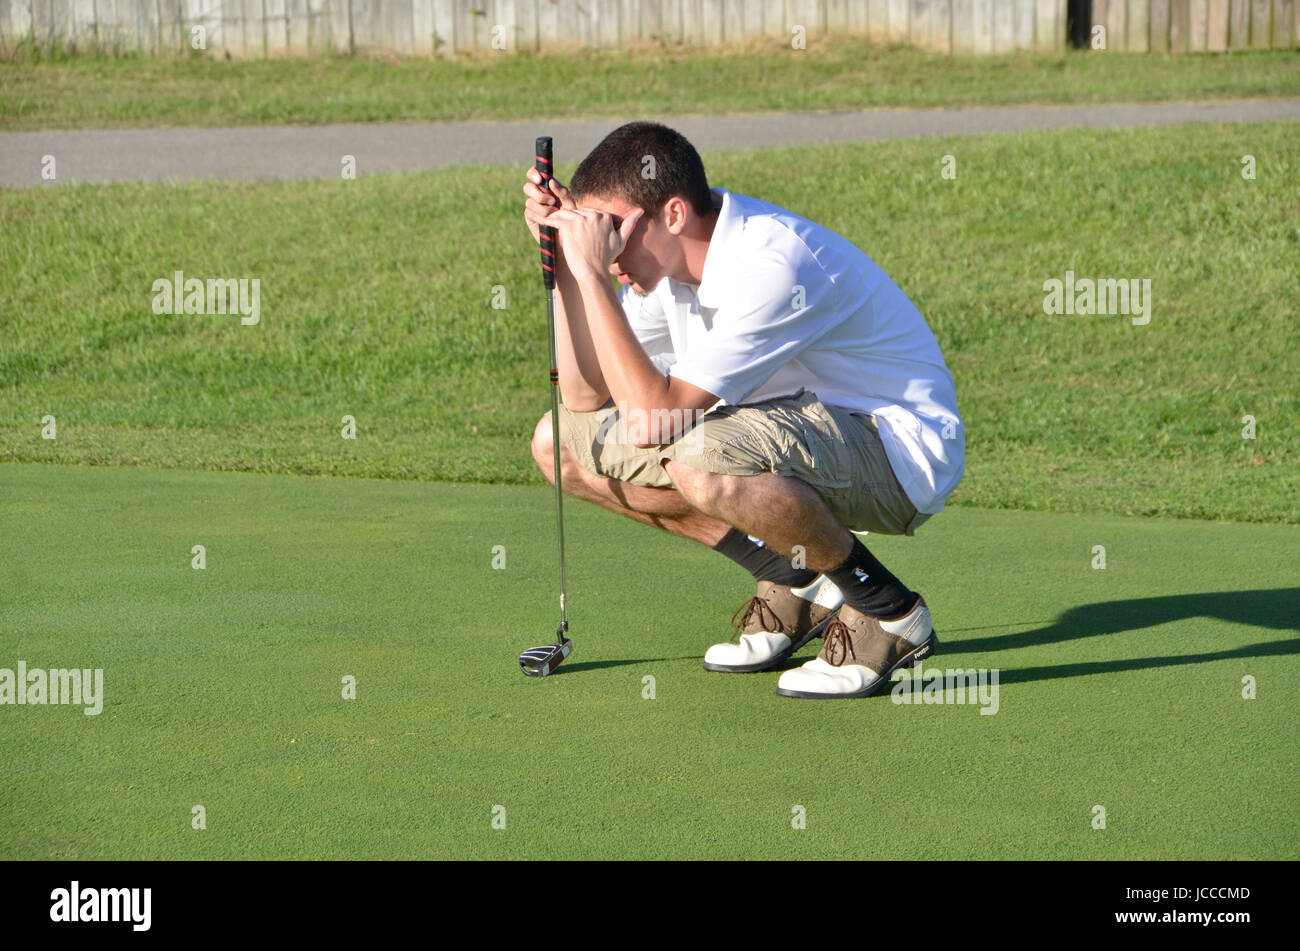 young man playing golf Stock Photo